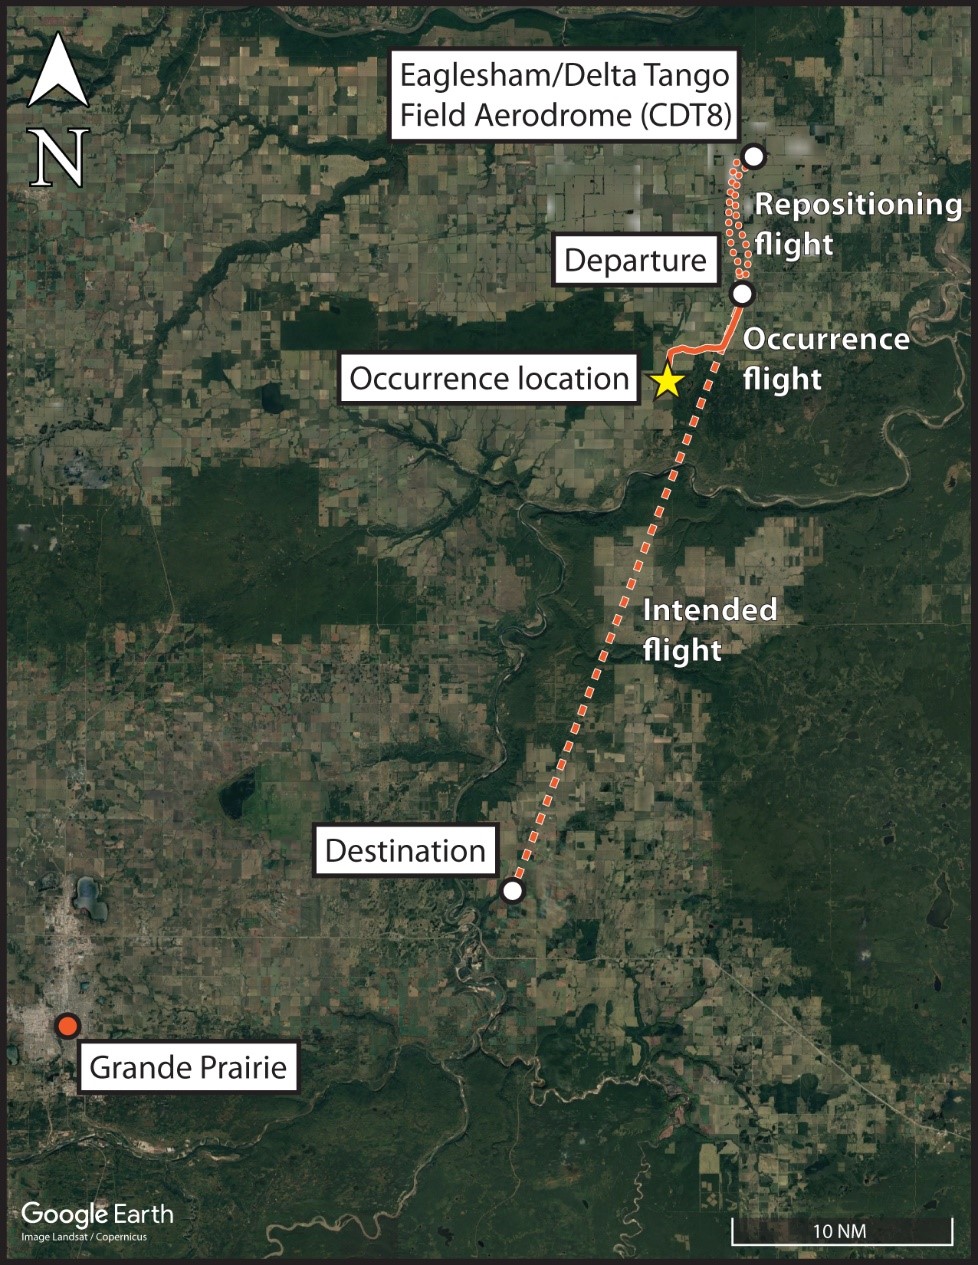 Map showing the repositioning flight (dotted line), the intended flight path (dashed line) and the actual flight path (solid line) (Source: Google Earth, with TSB annotations)